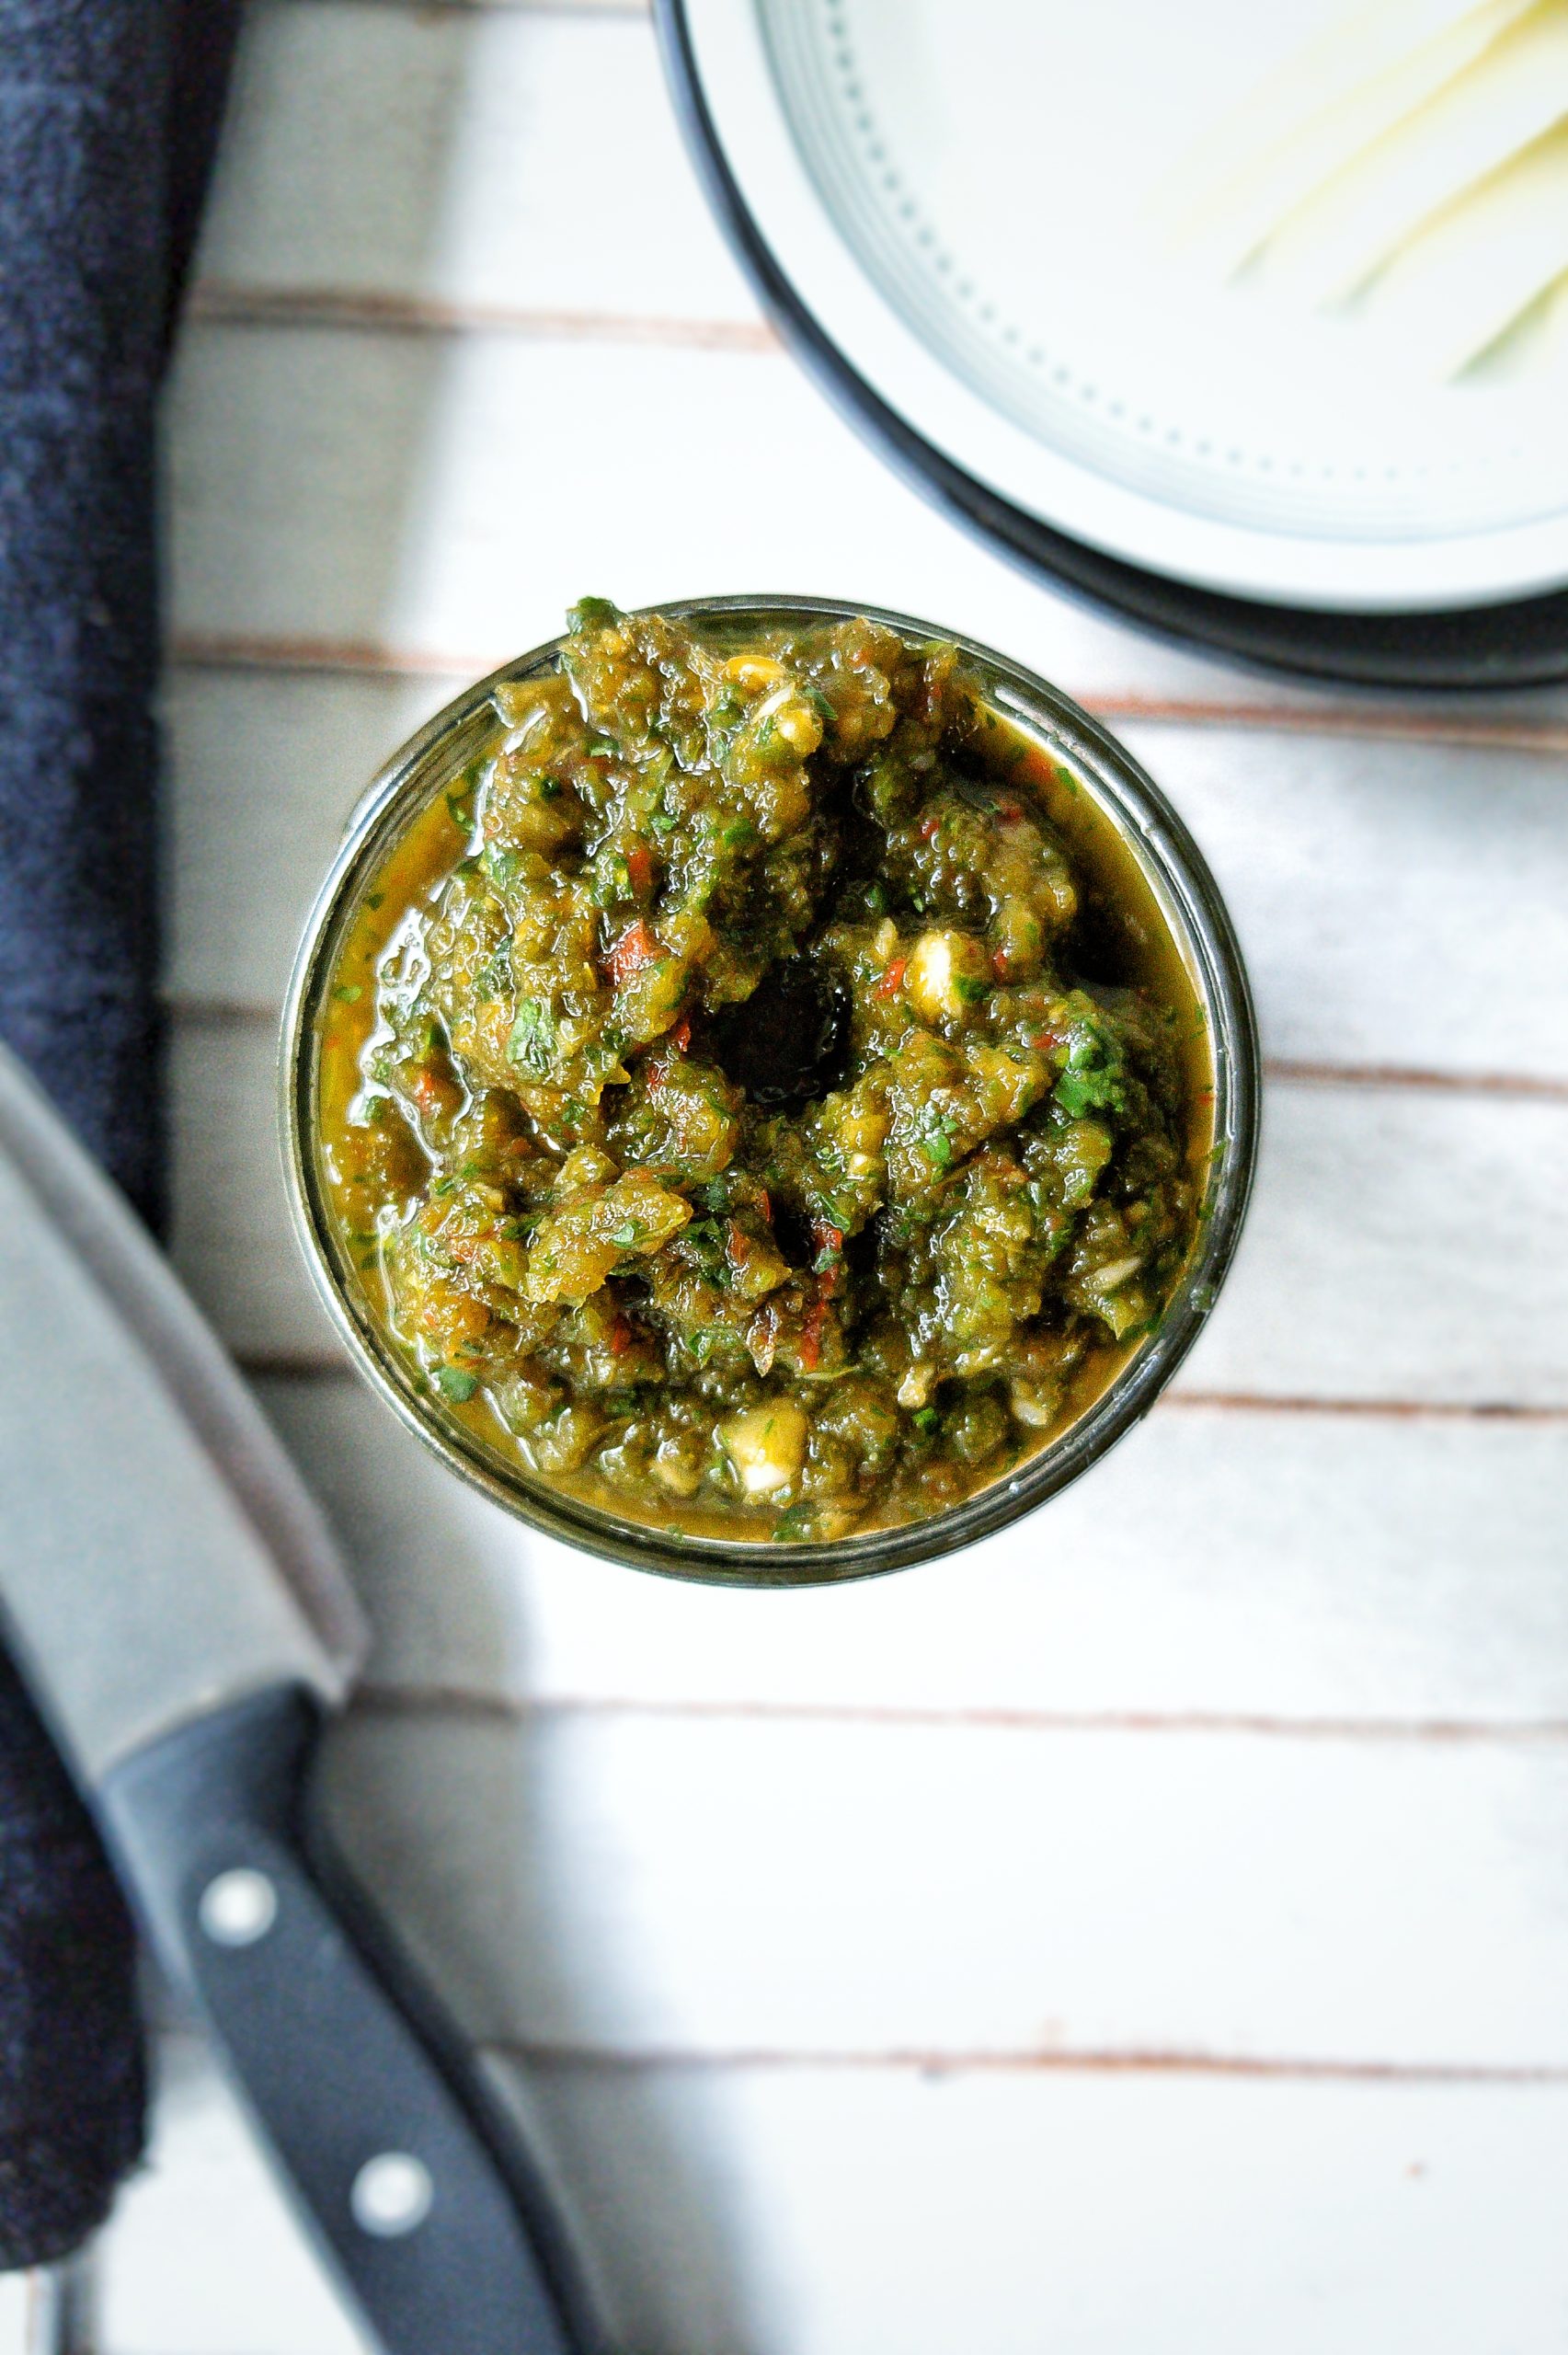 Homemade Puerto Rican sofrito in a jar